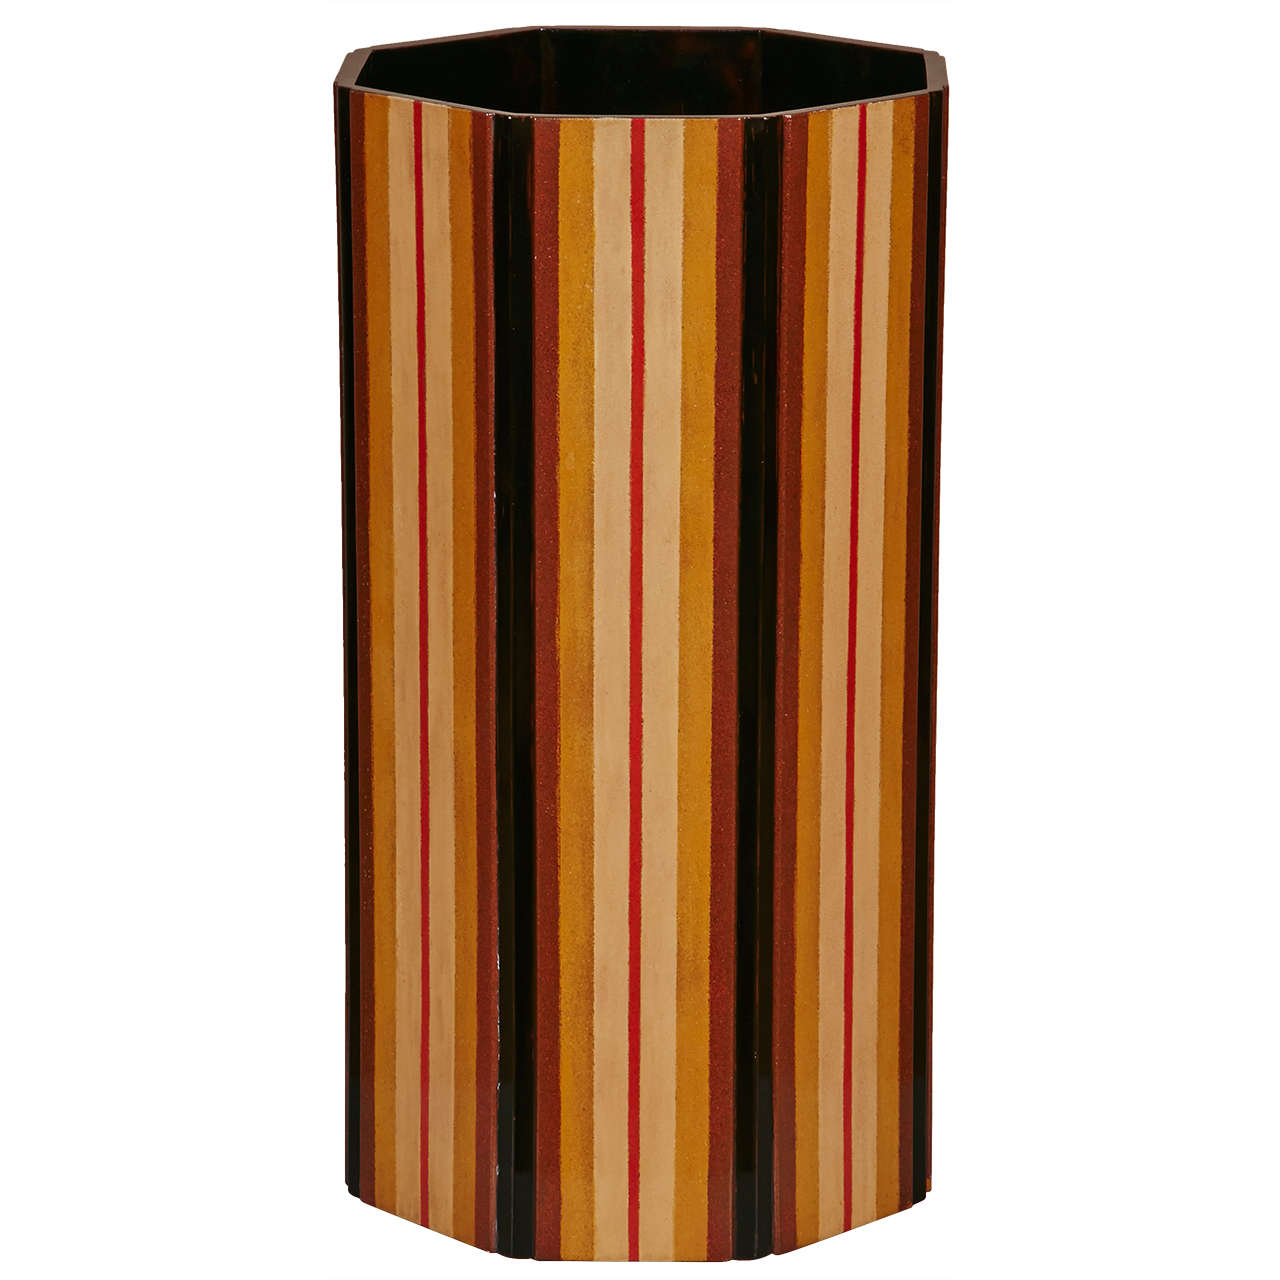 Japanese  Lacquer Vase With Stripe Design